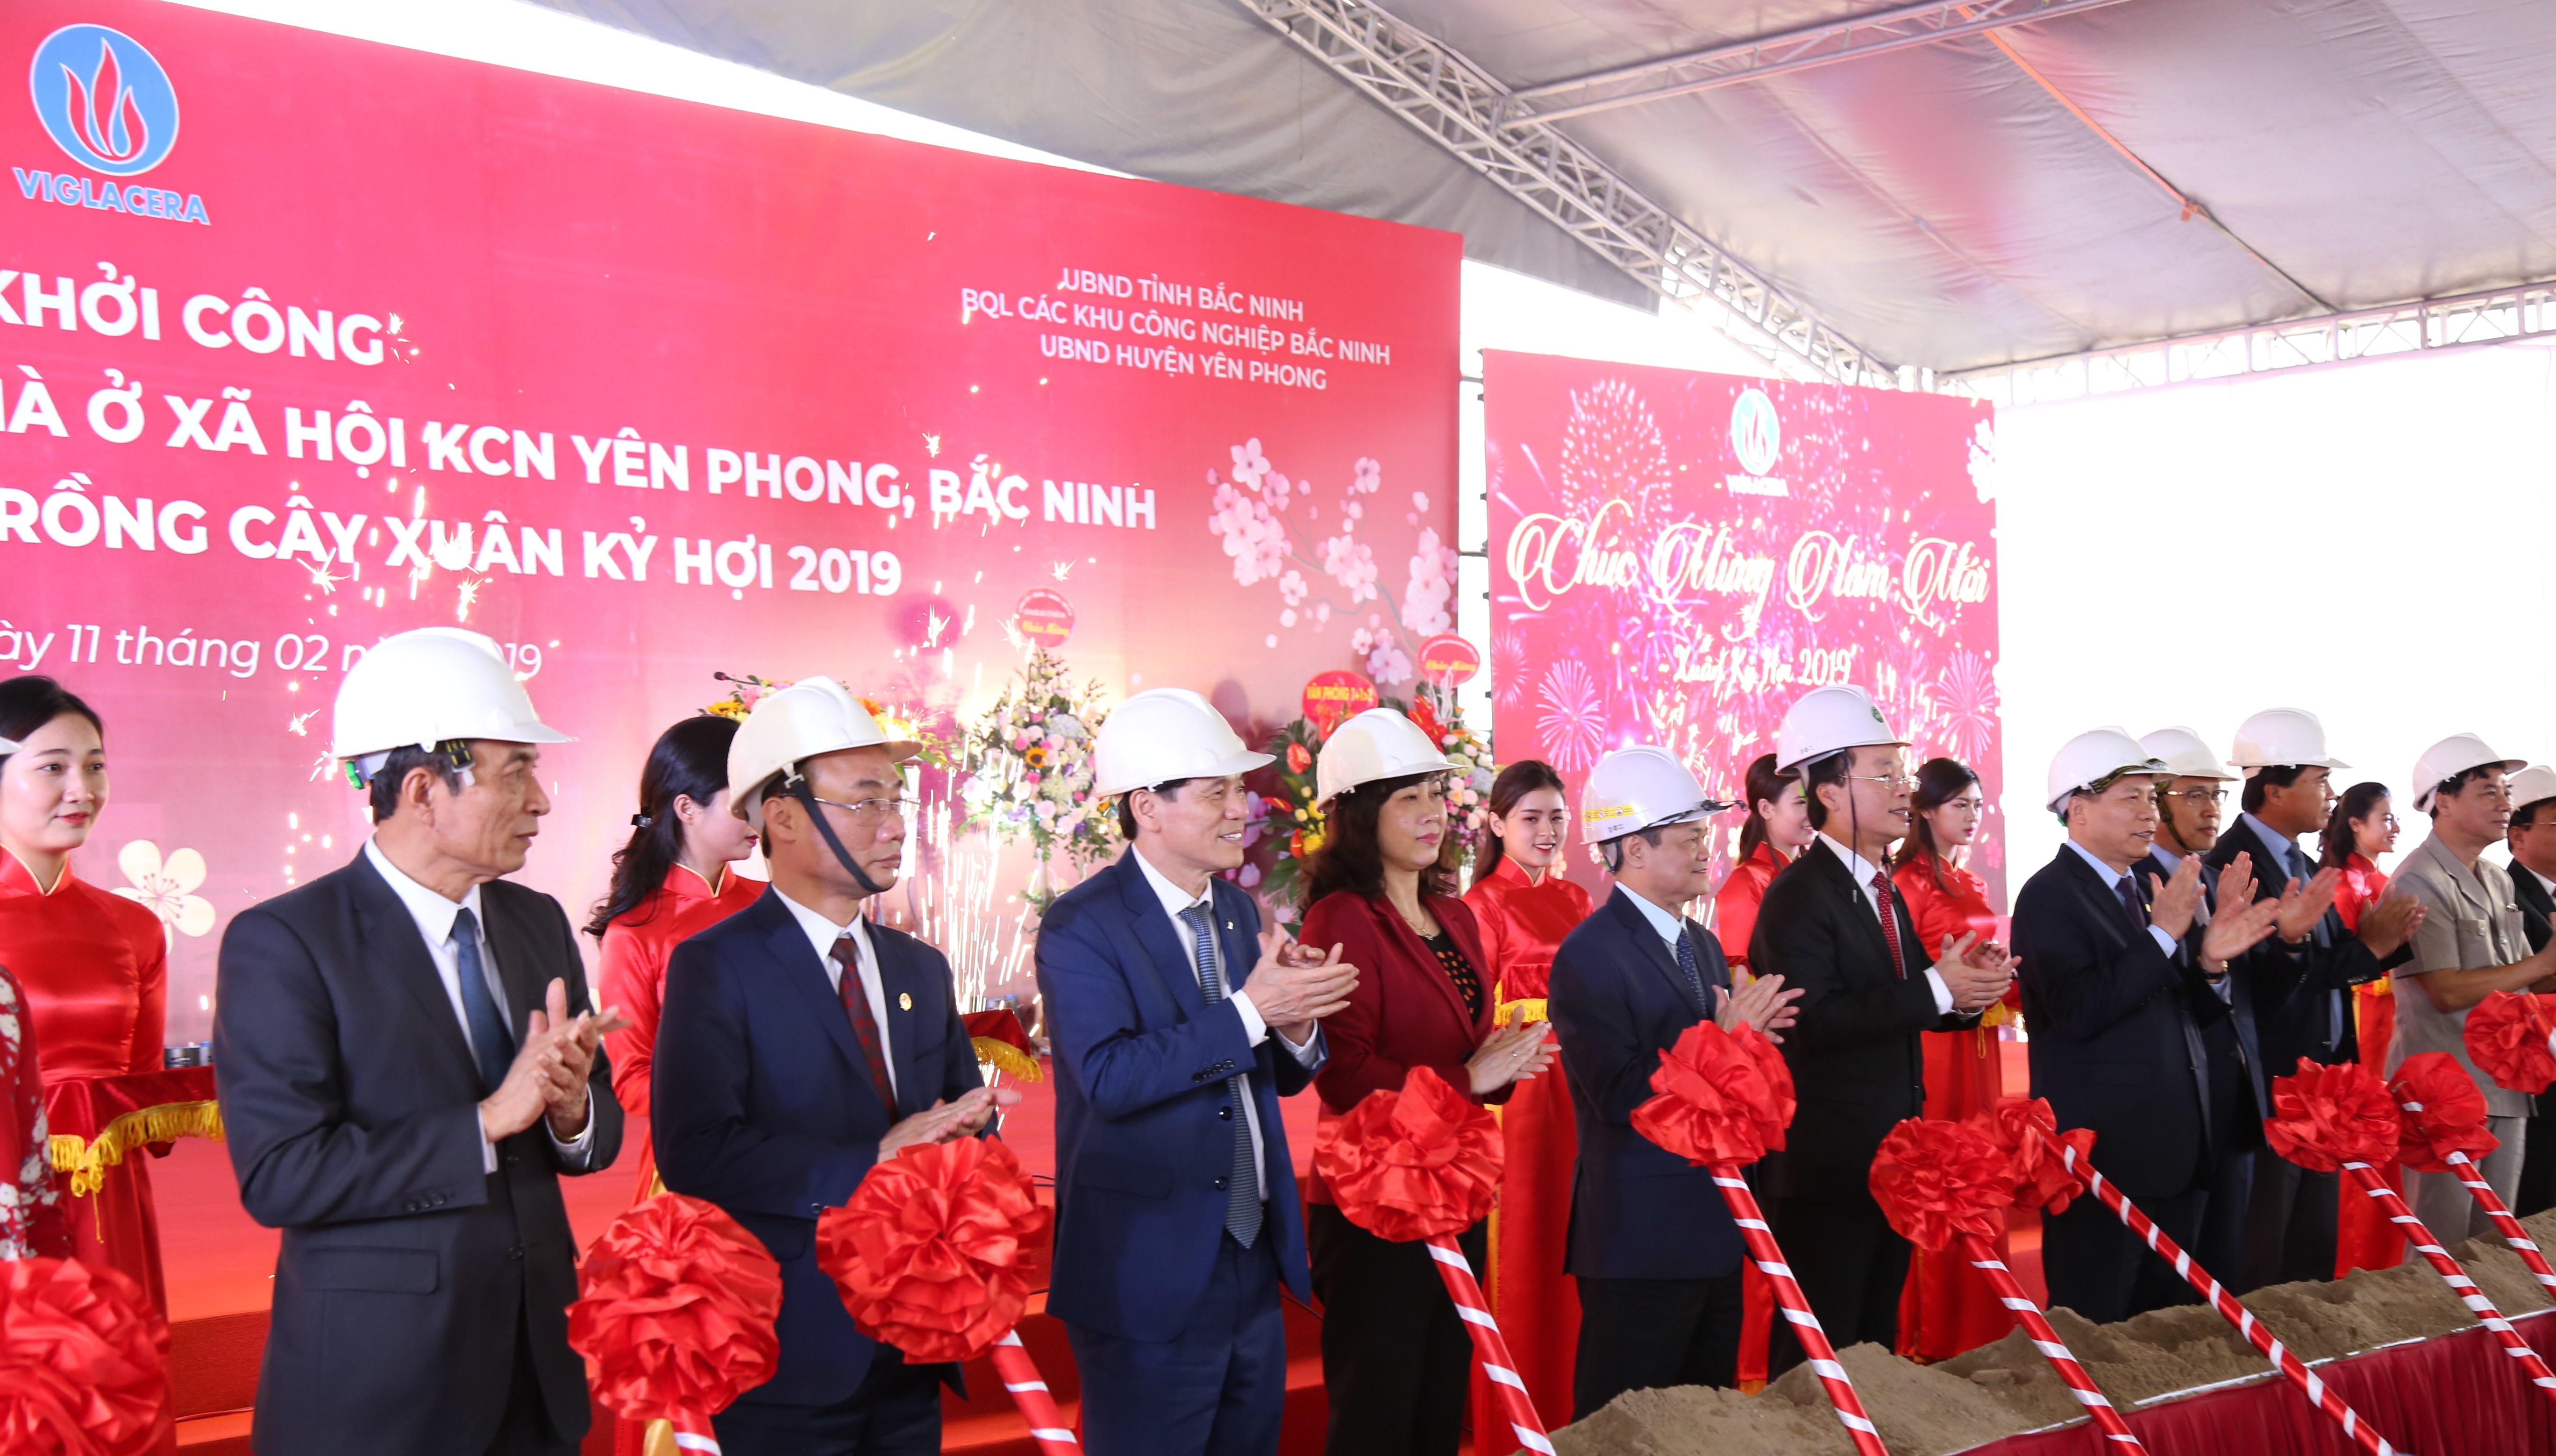 Viglacera hold the groundbreaking ceremony of the culture institution for social housing area in Yen Phong – Bac Ninh Industrial zone and activate the Tree planting festival in the Year of the Pig 2019